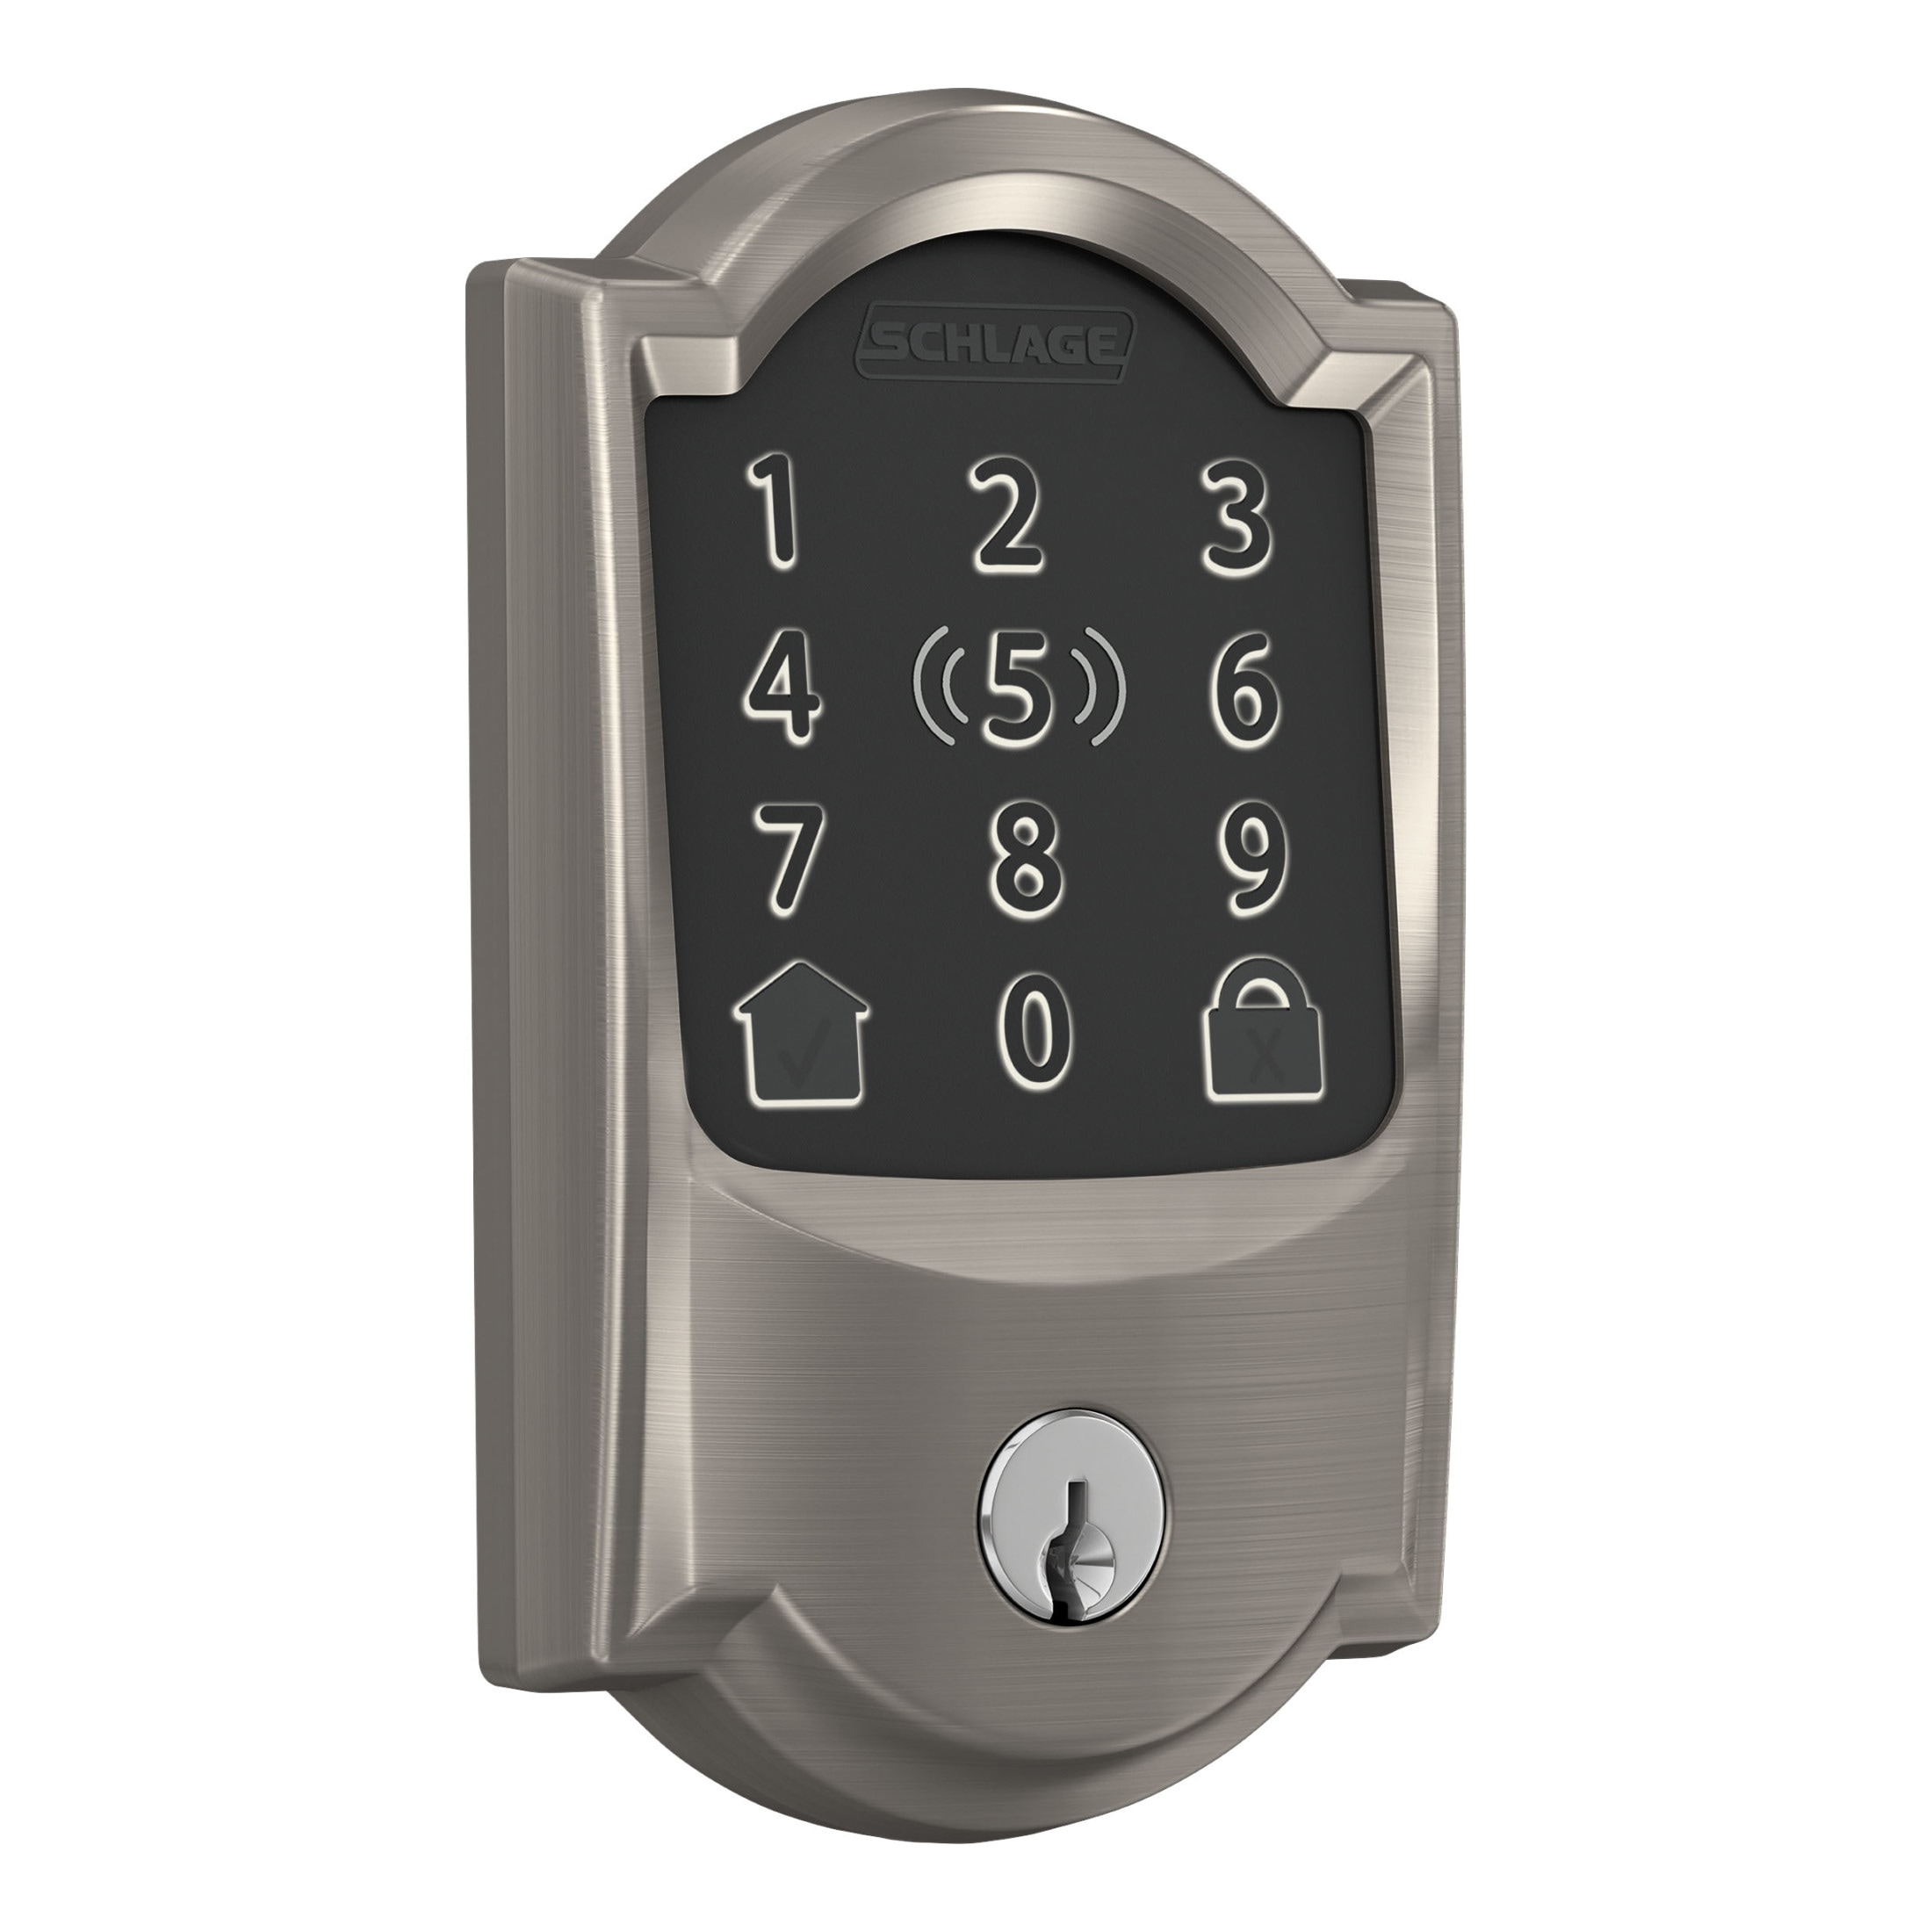 Schlage Encode Plus Camelot Satin Nickel Wifi Bluetooth Single Cylinder  Electronic Deadbolt Lighted Keypad Touchscreen Smart Lock at